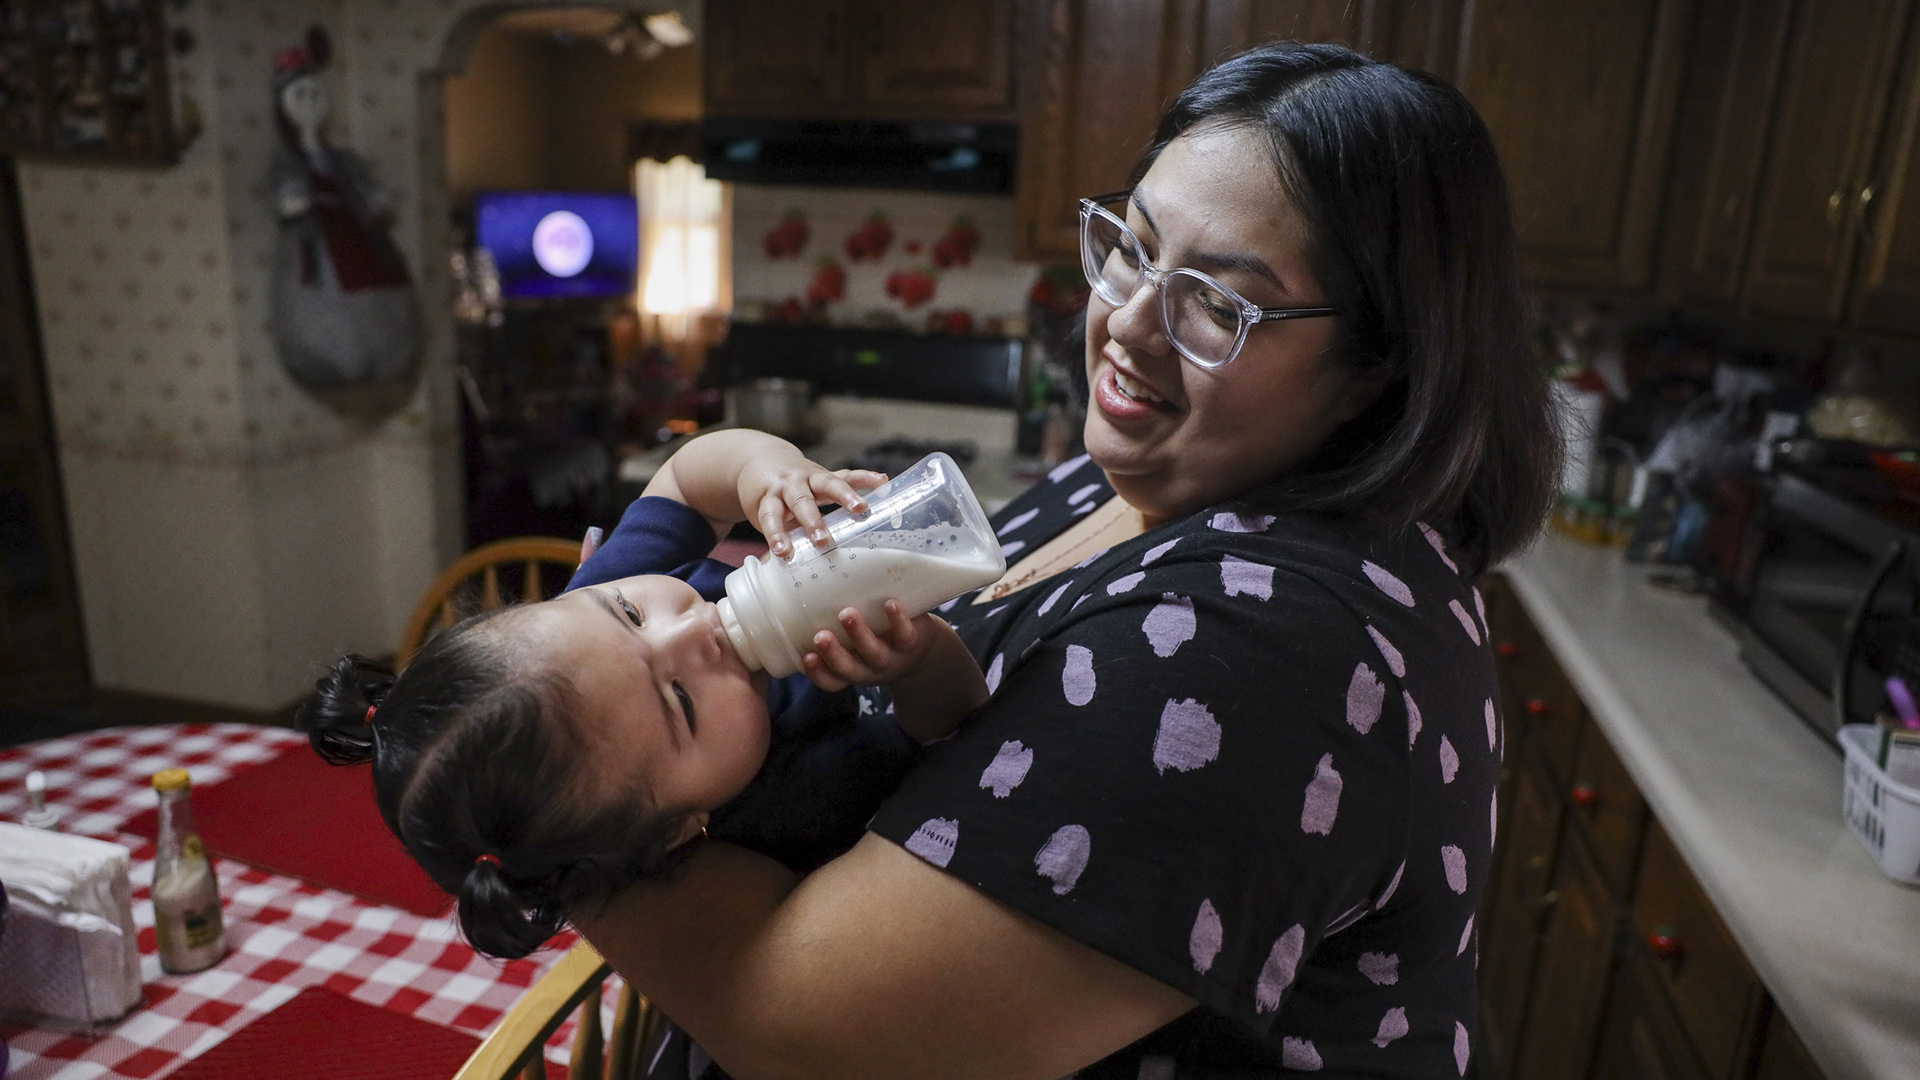 Adaliz Angeles feeds from a bottle while being held by Raquel Urbina while standing in a kitchen.